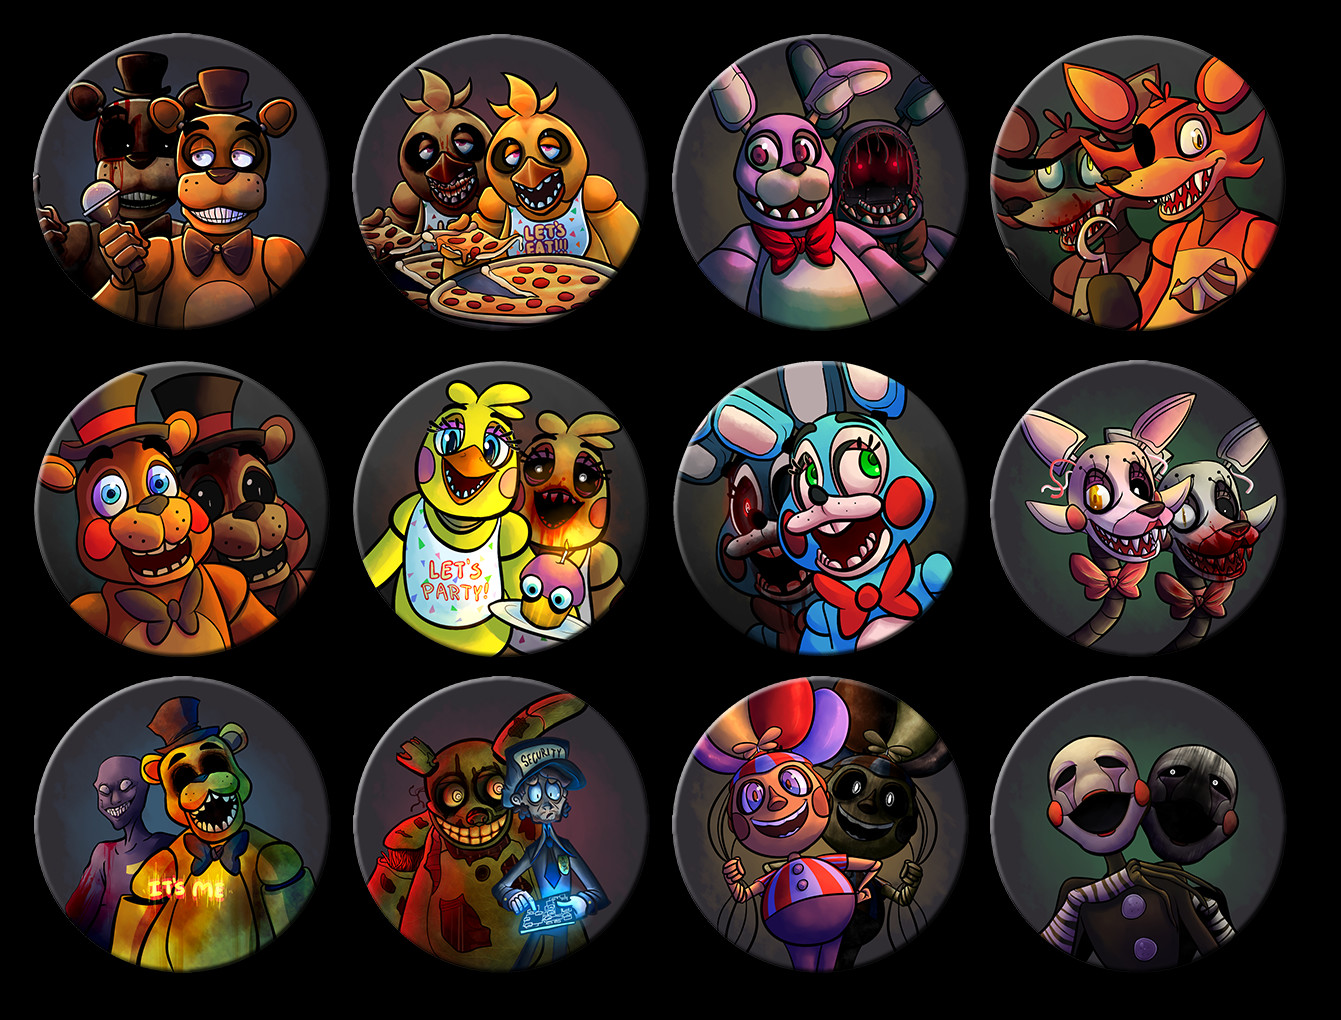 ArtStation - Five Nights at Freddy's Button Set